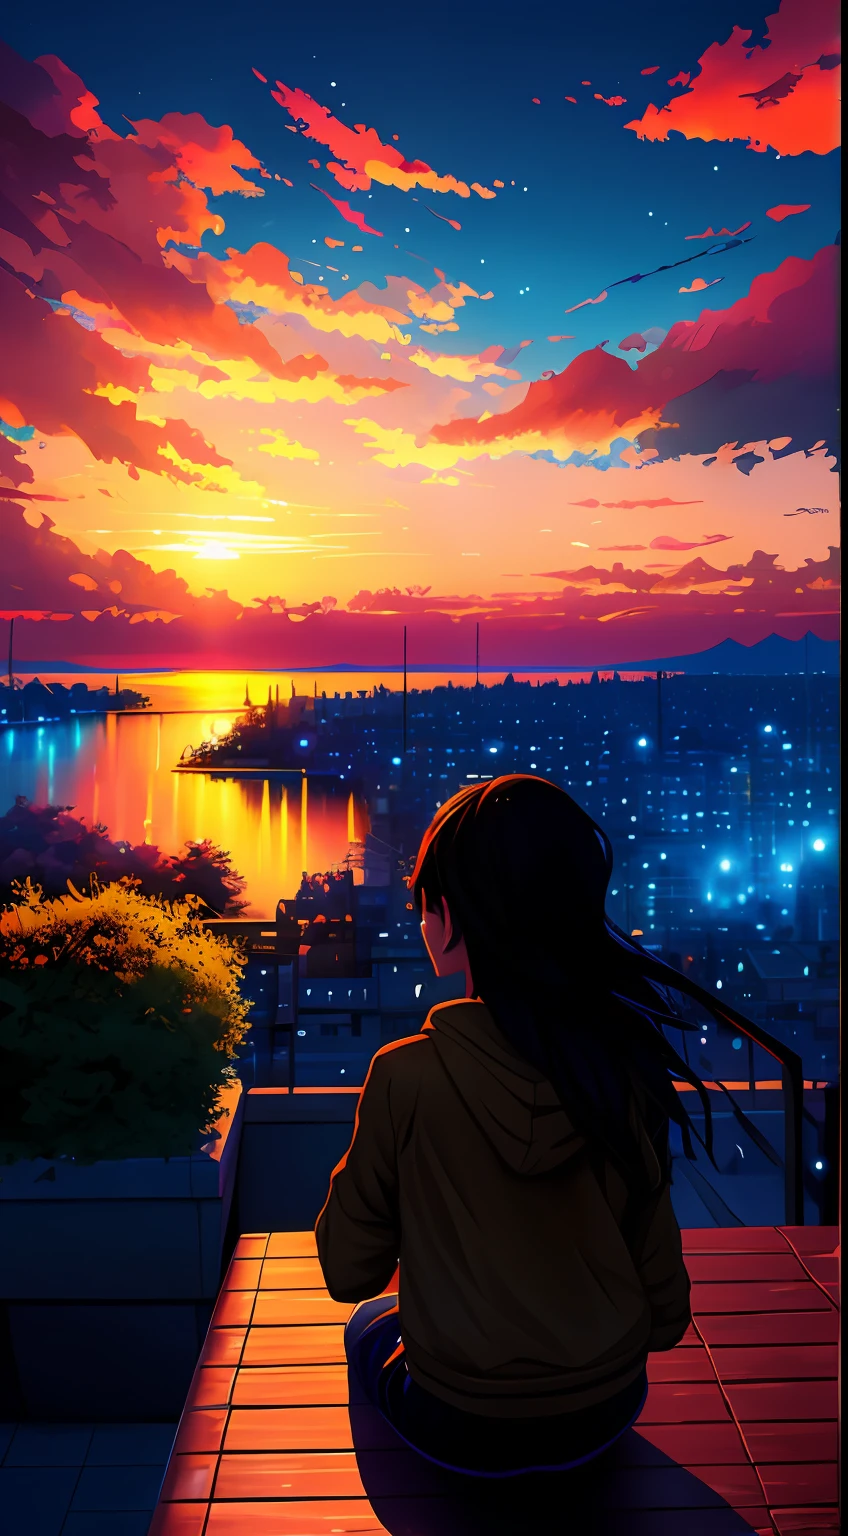 a girl watches the sunset from a rooftop by Makoto Shinkai, by Makoto Shinkai, 新海誠 シリル・ロランド, 新海誠のスタイル, アニメ. by Makoto Shinkai, realistic アニメ 3 d style, グウェイズ風のアートワーク, in 新海誠のスタイル